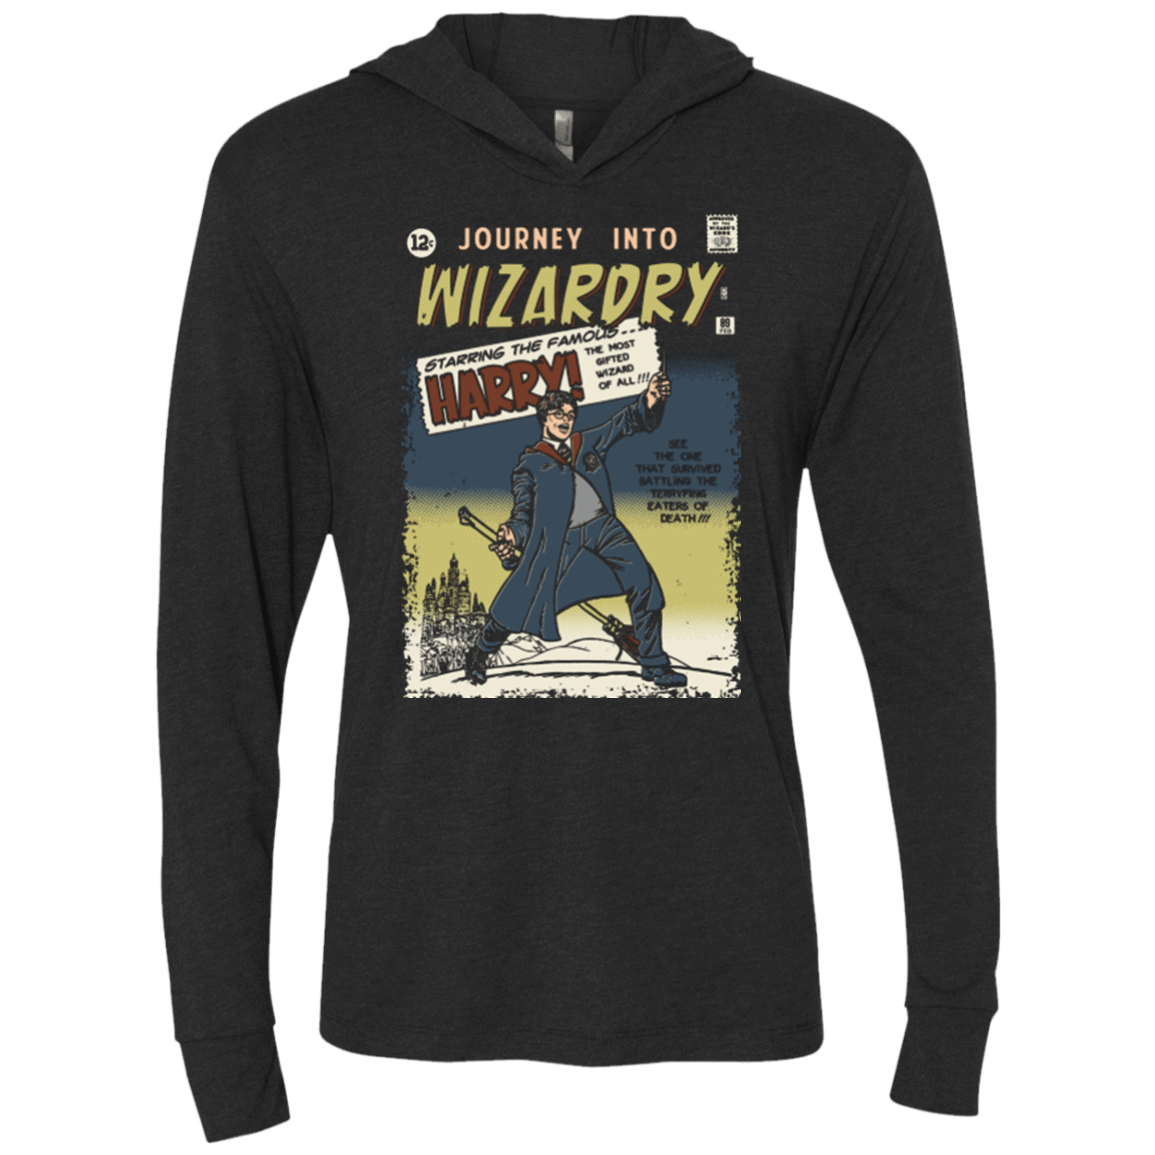 T-Shirts Vintage Black / X-Small Journey into Wizardry Triblend Long Sleeve Hoodie Tee